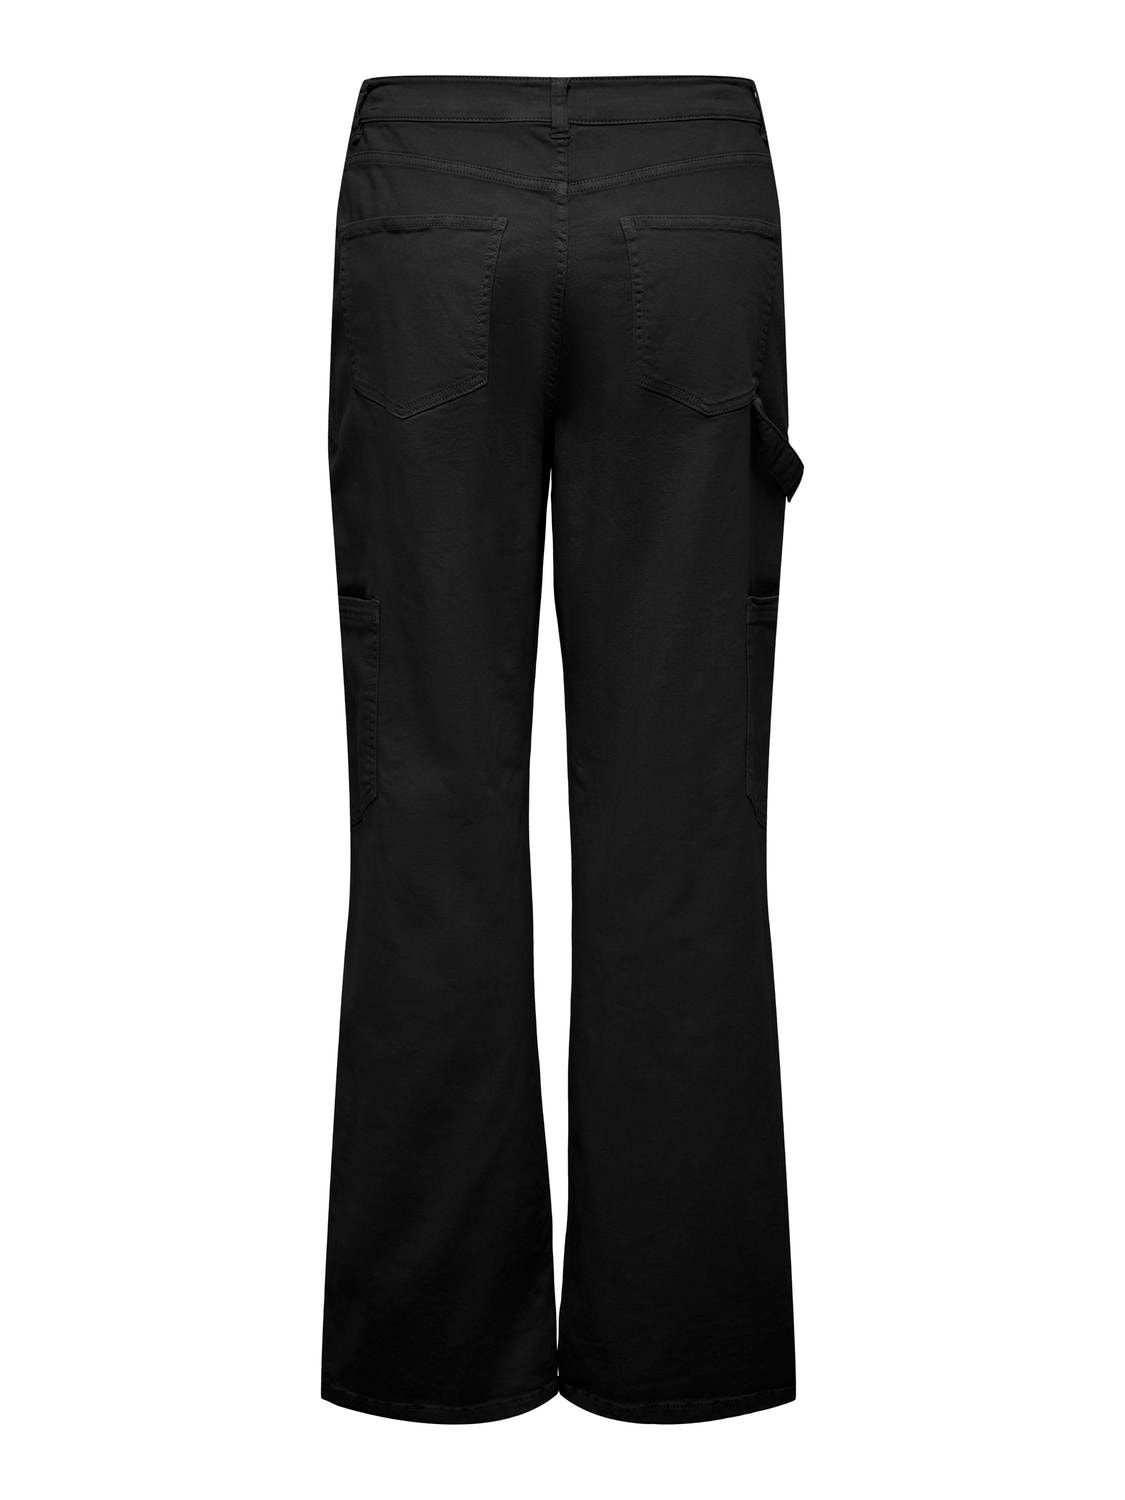 ONLY Karotte Hohe Taille Hose -Black - 15289025